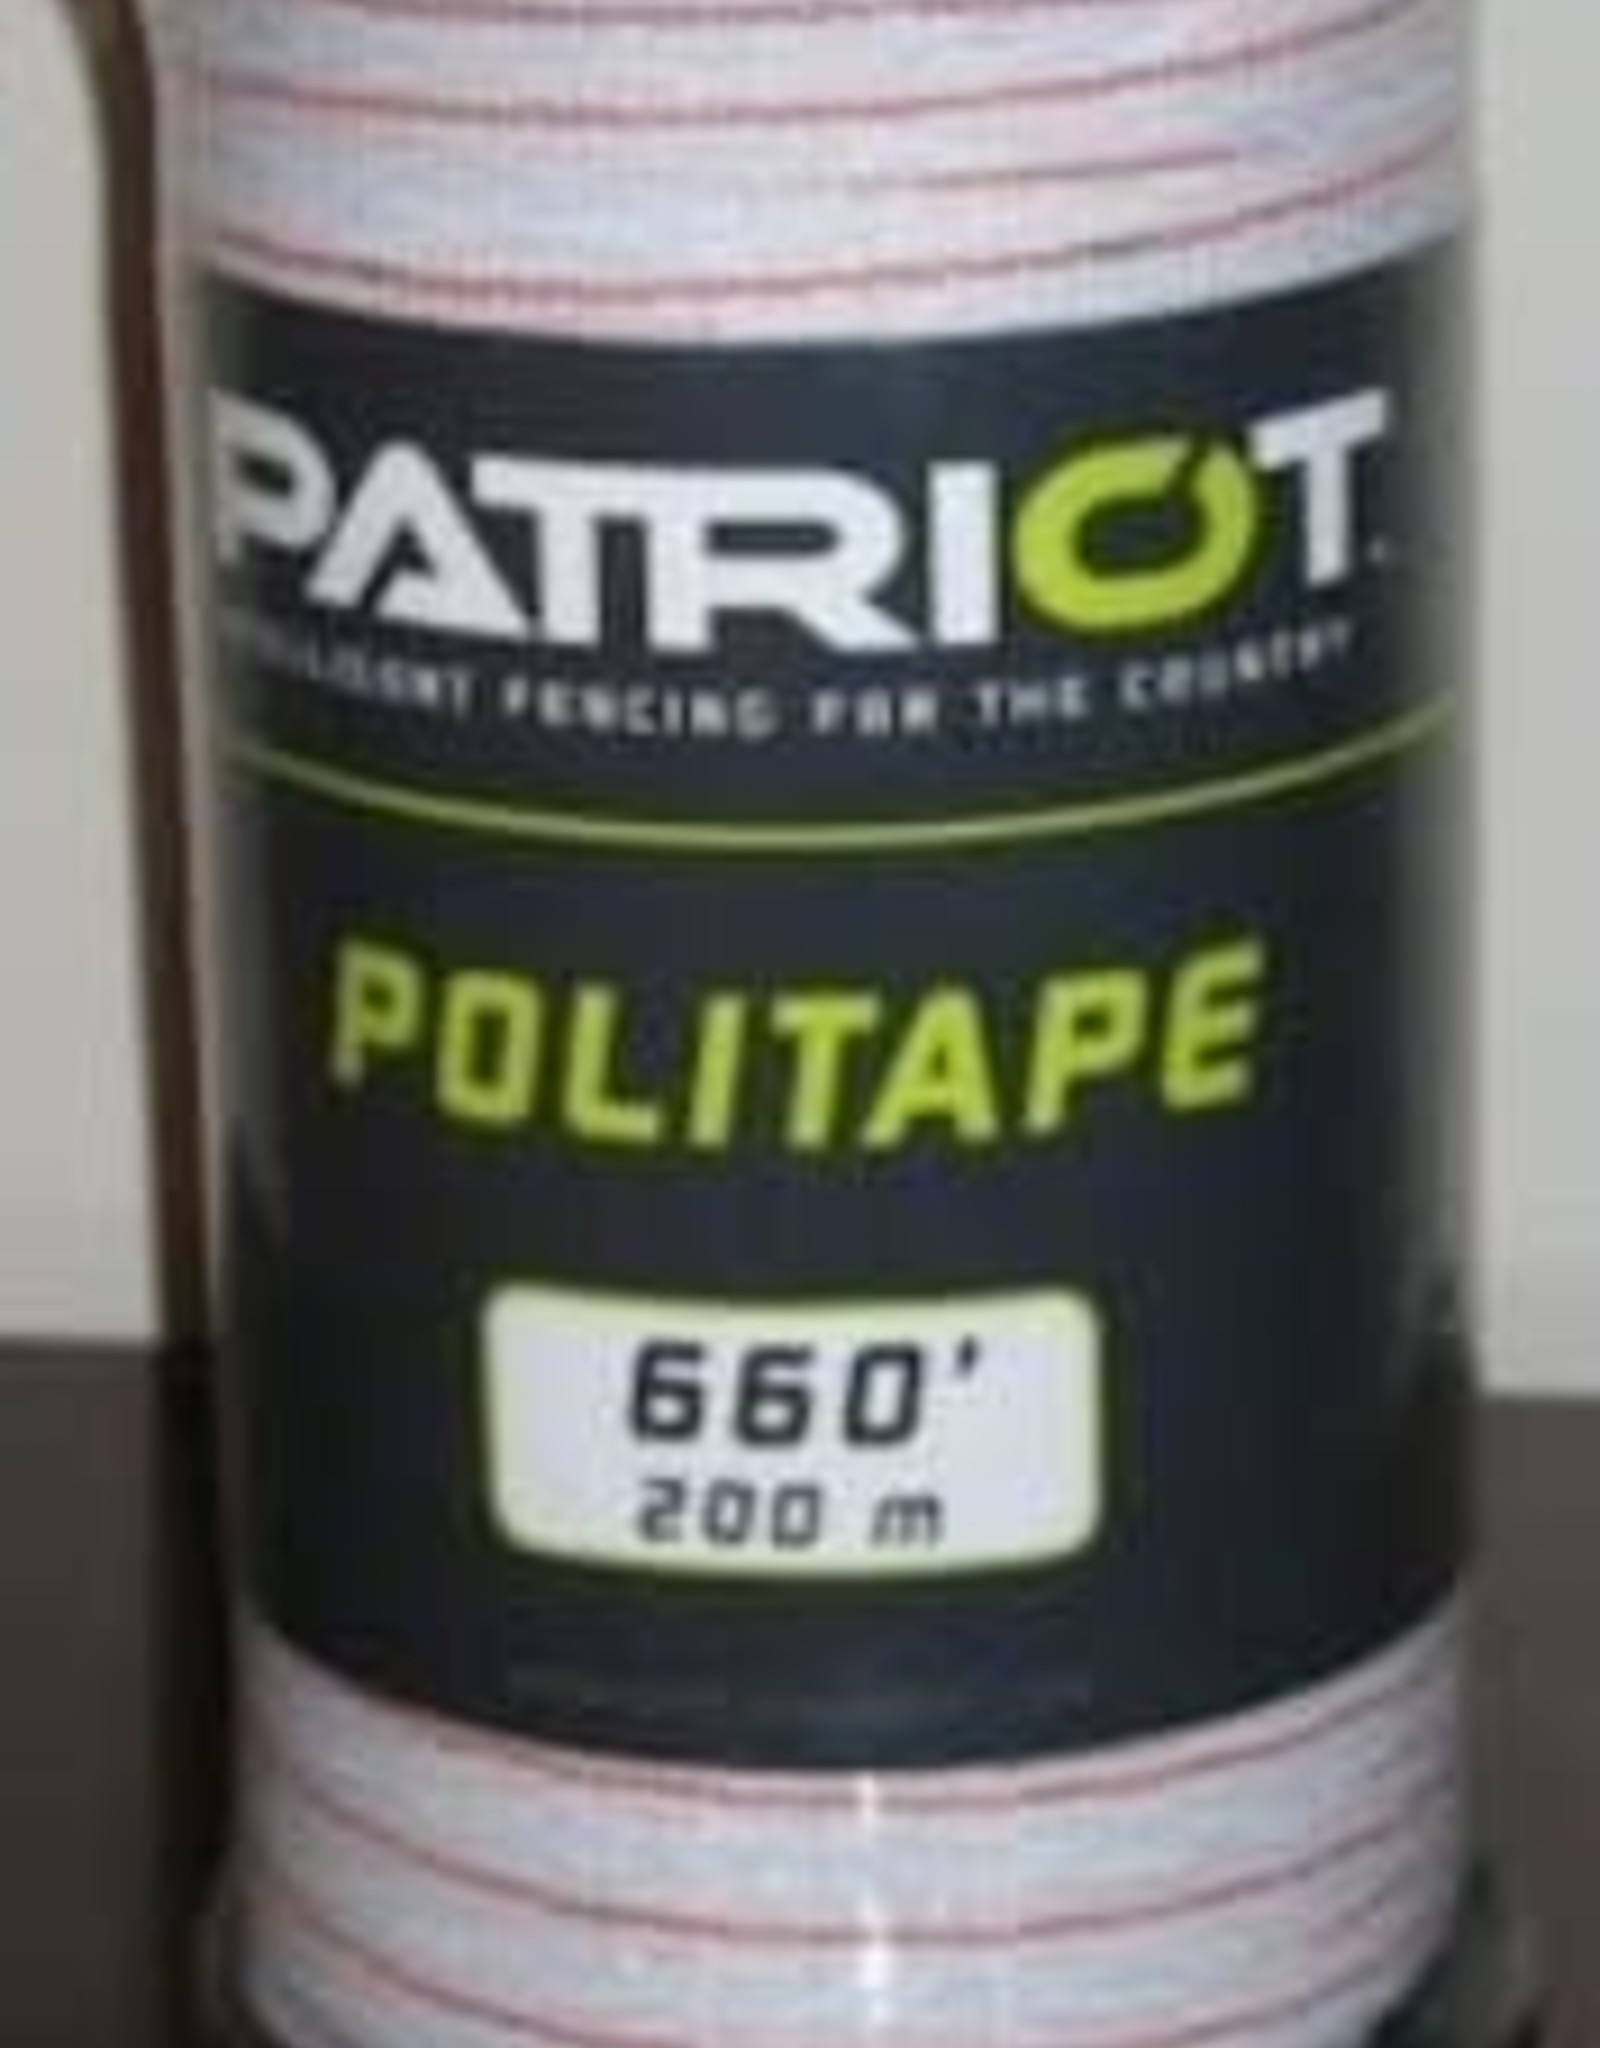 Patriot Electric Fence  tape POLITAPE WHITE 660' x 1/2" roll